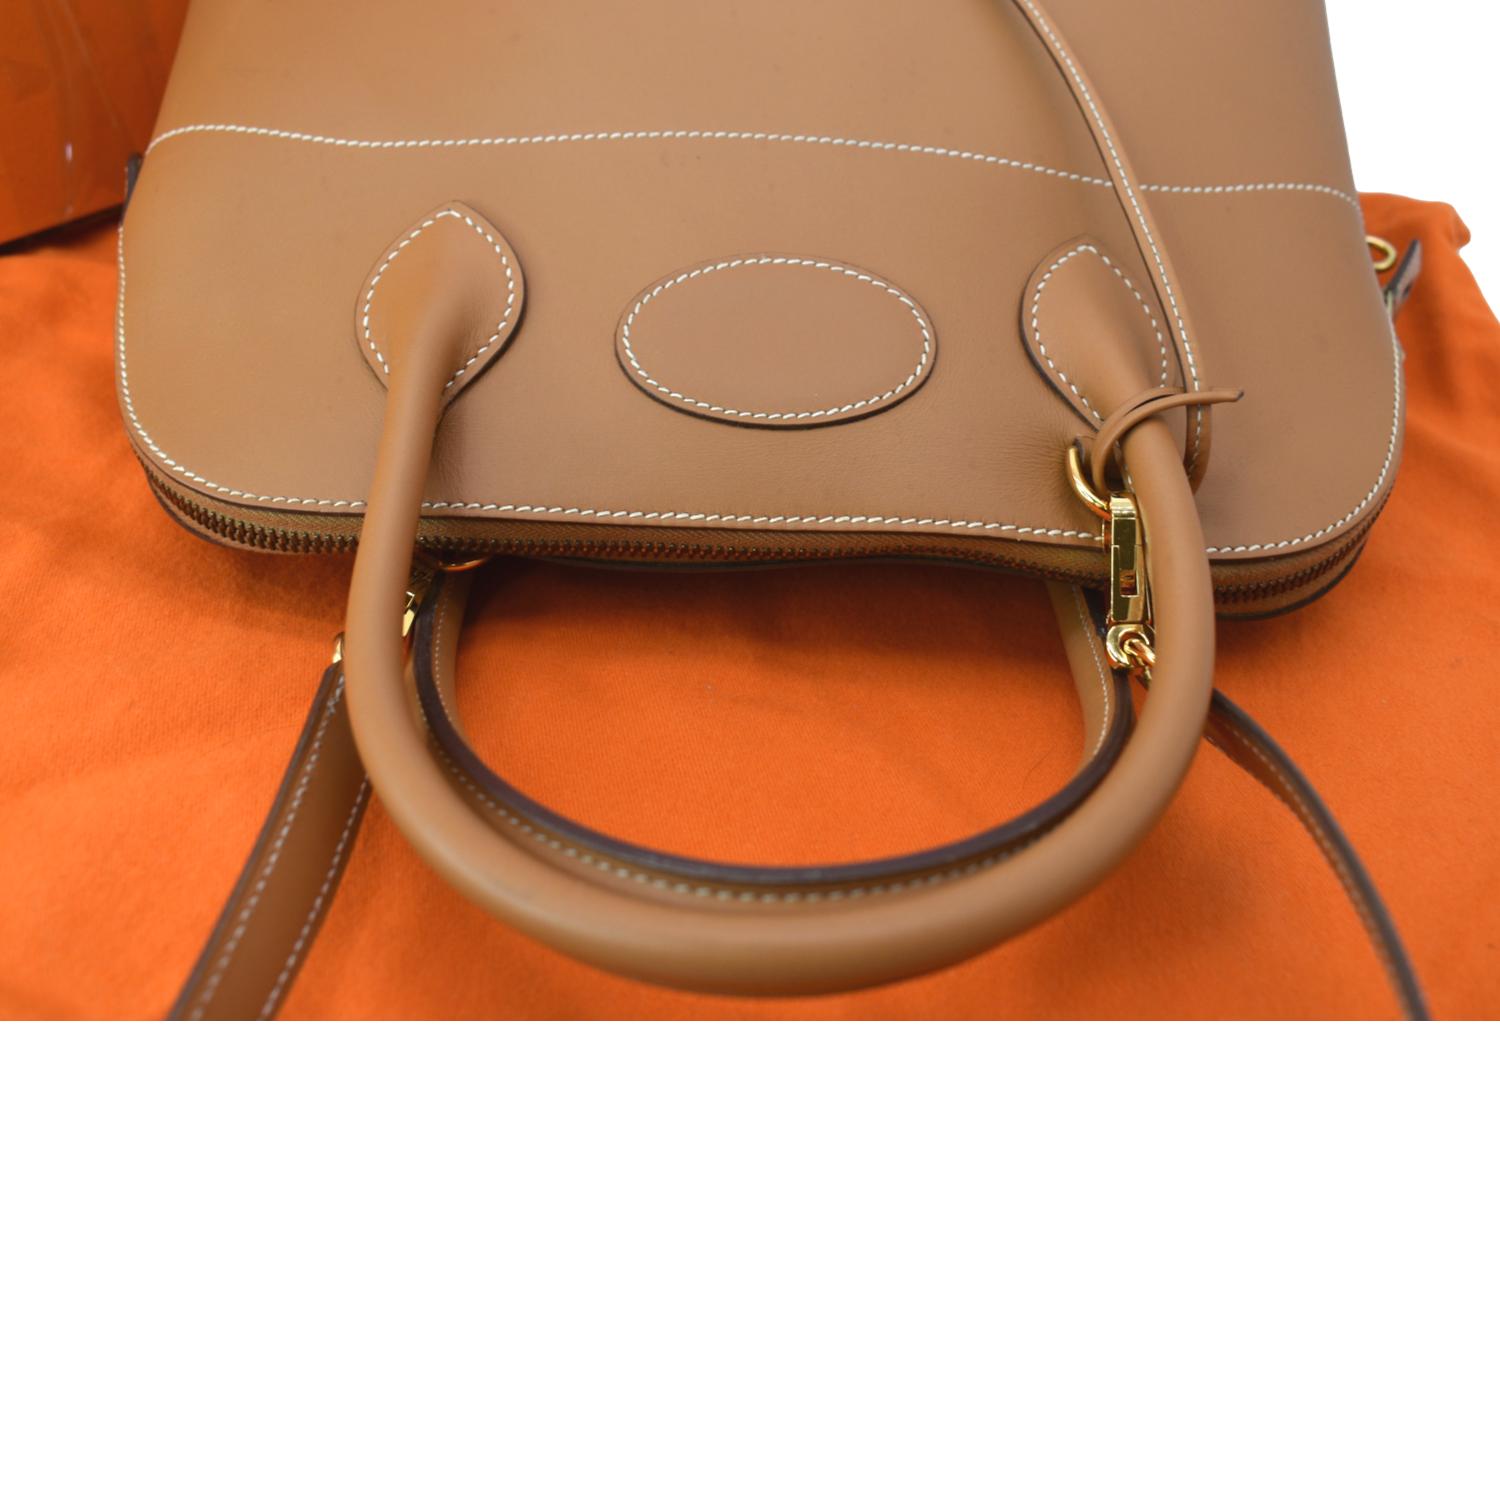 Hermès - Authenticated Bolide Handbag - Leather Brown Plain for Women, Very Good Condition